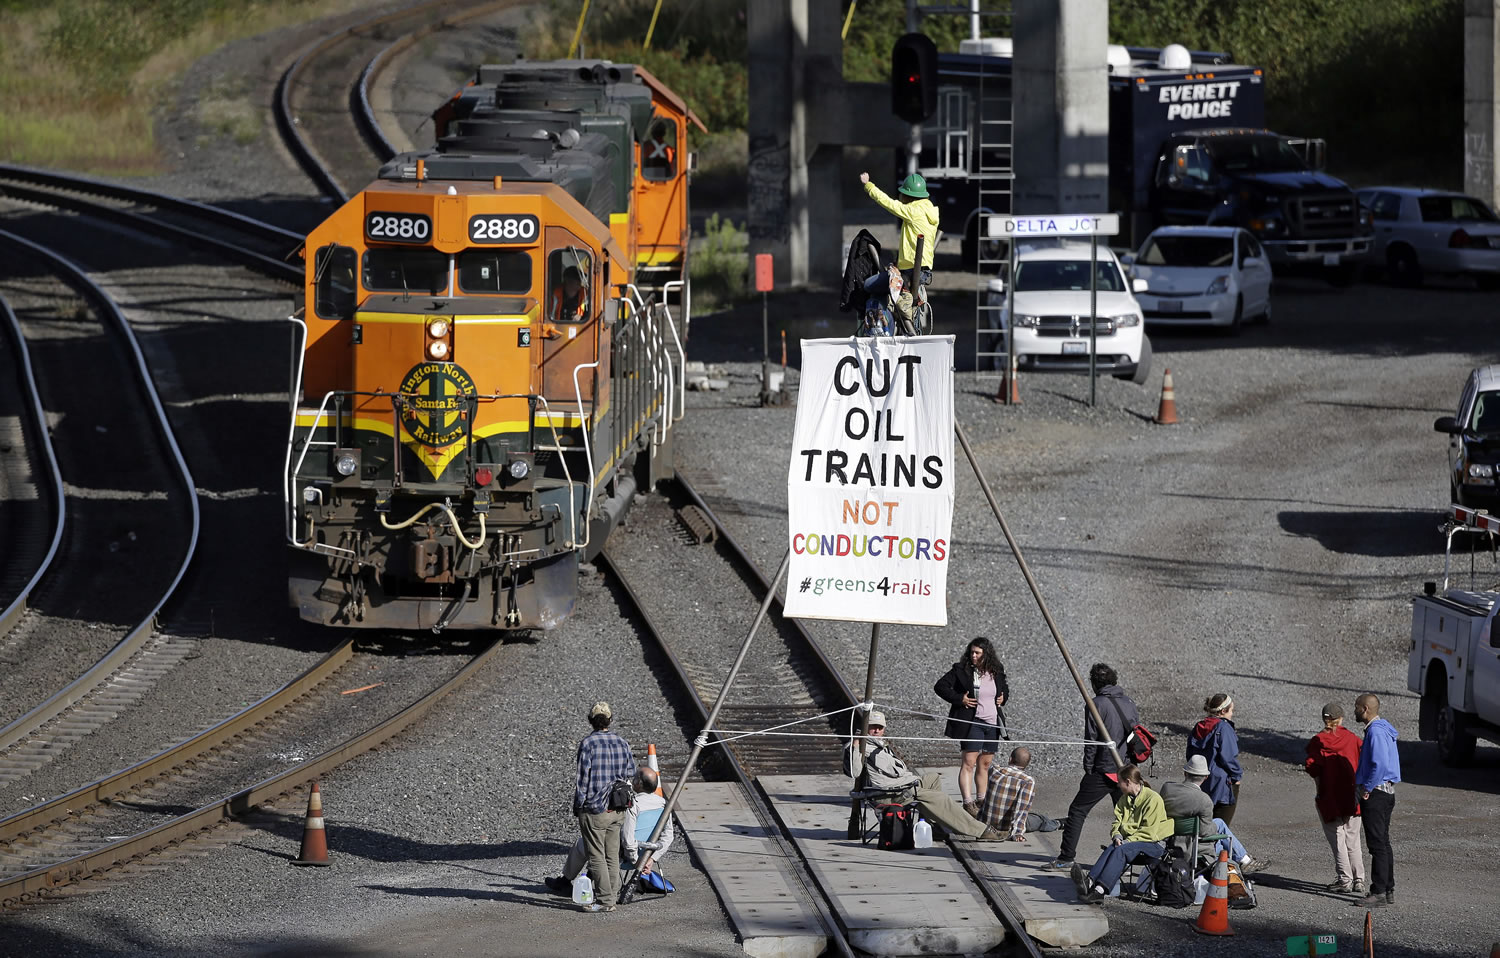 Abby Brockway waves from atop a tripod erected on train tracks to a pair of engines passing on an adjacent track Tuesday in Everett.